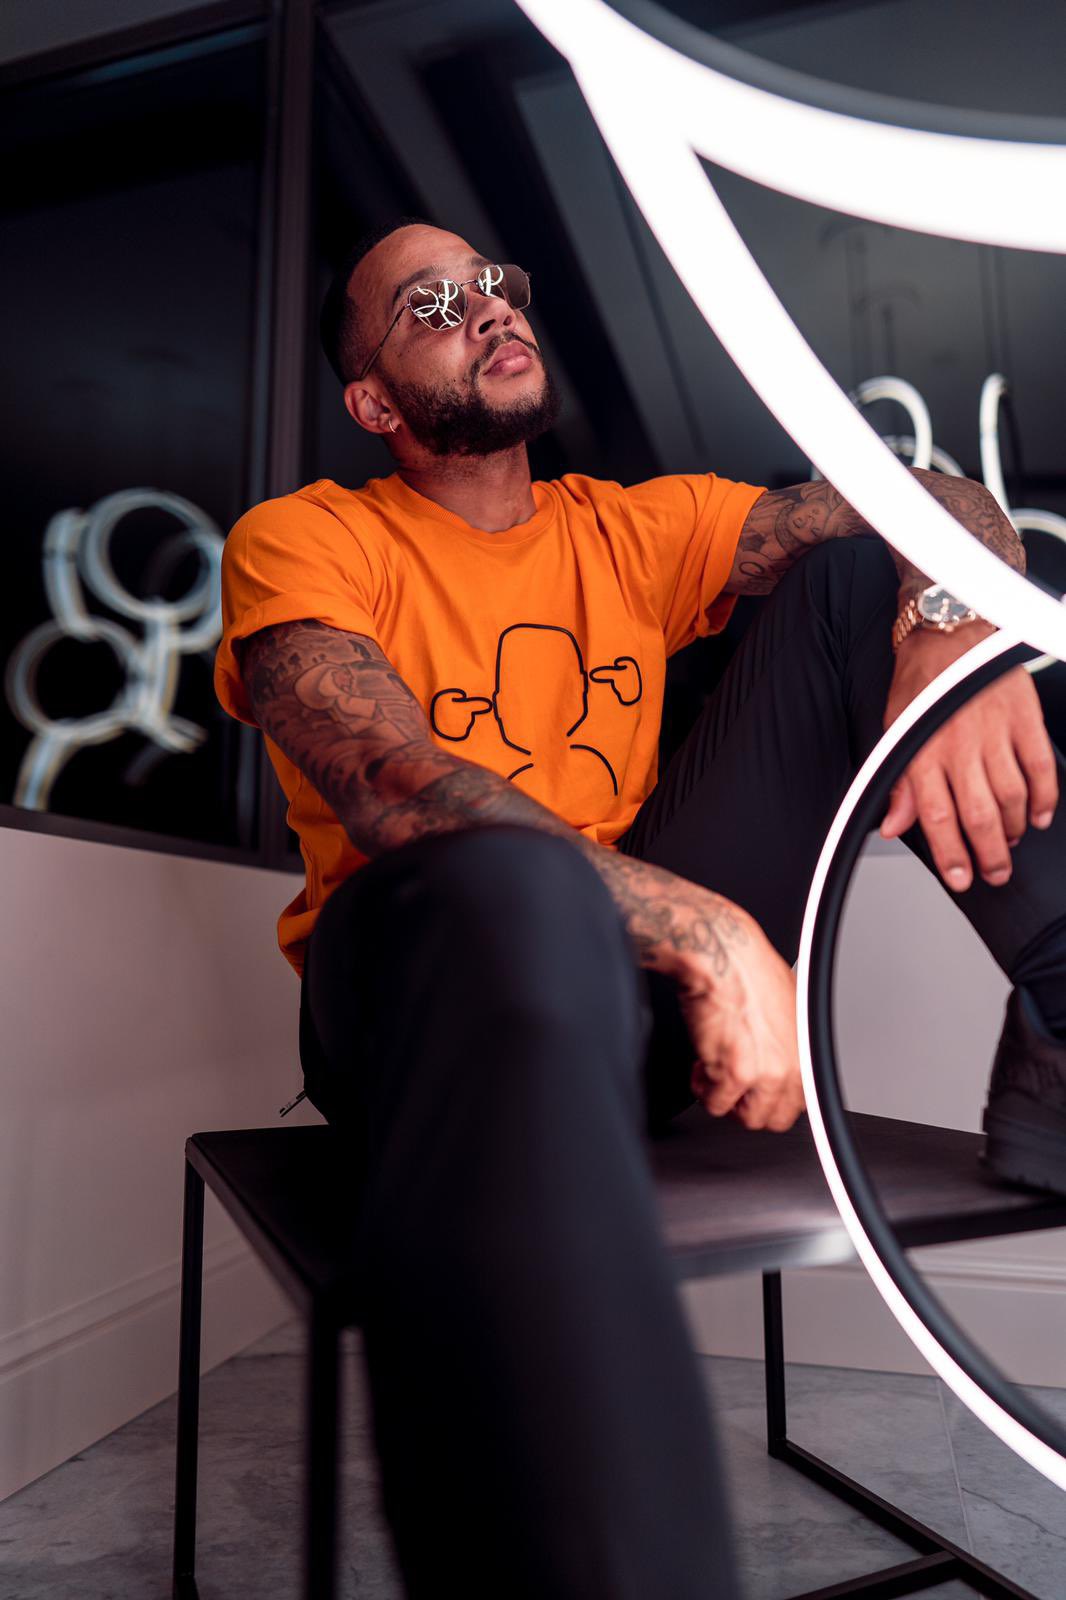 Memphis Depay Clothing (@official_MDC) / X